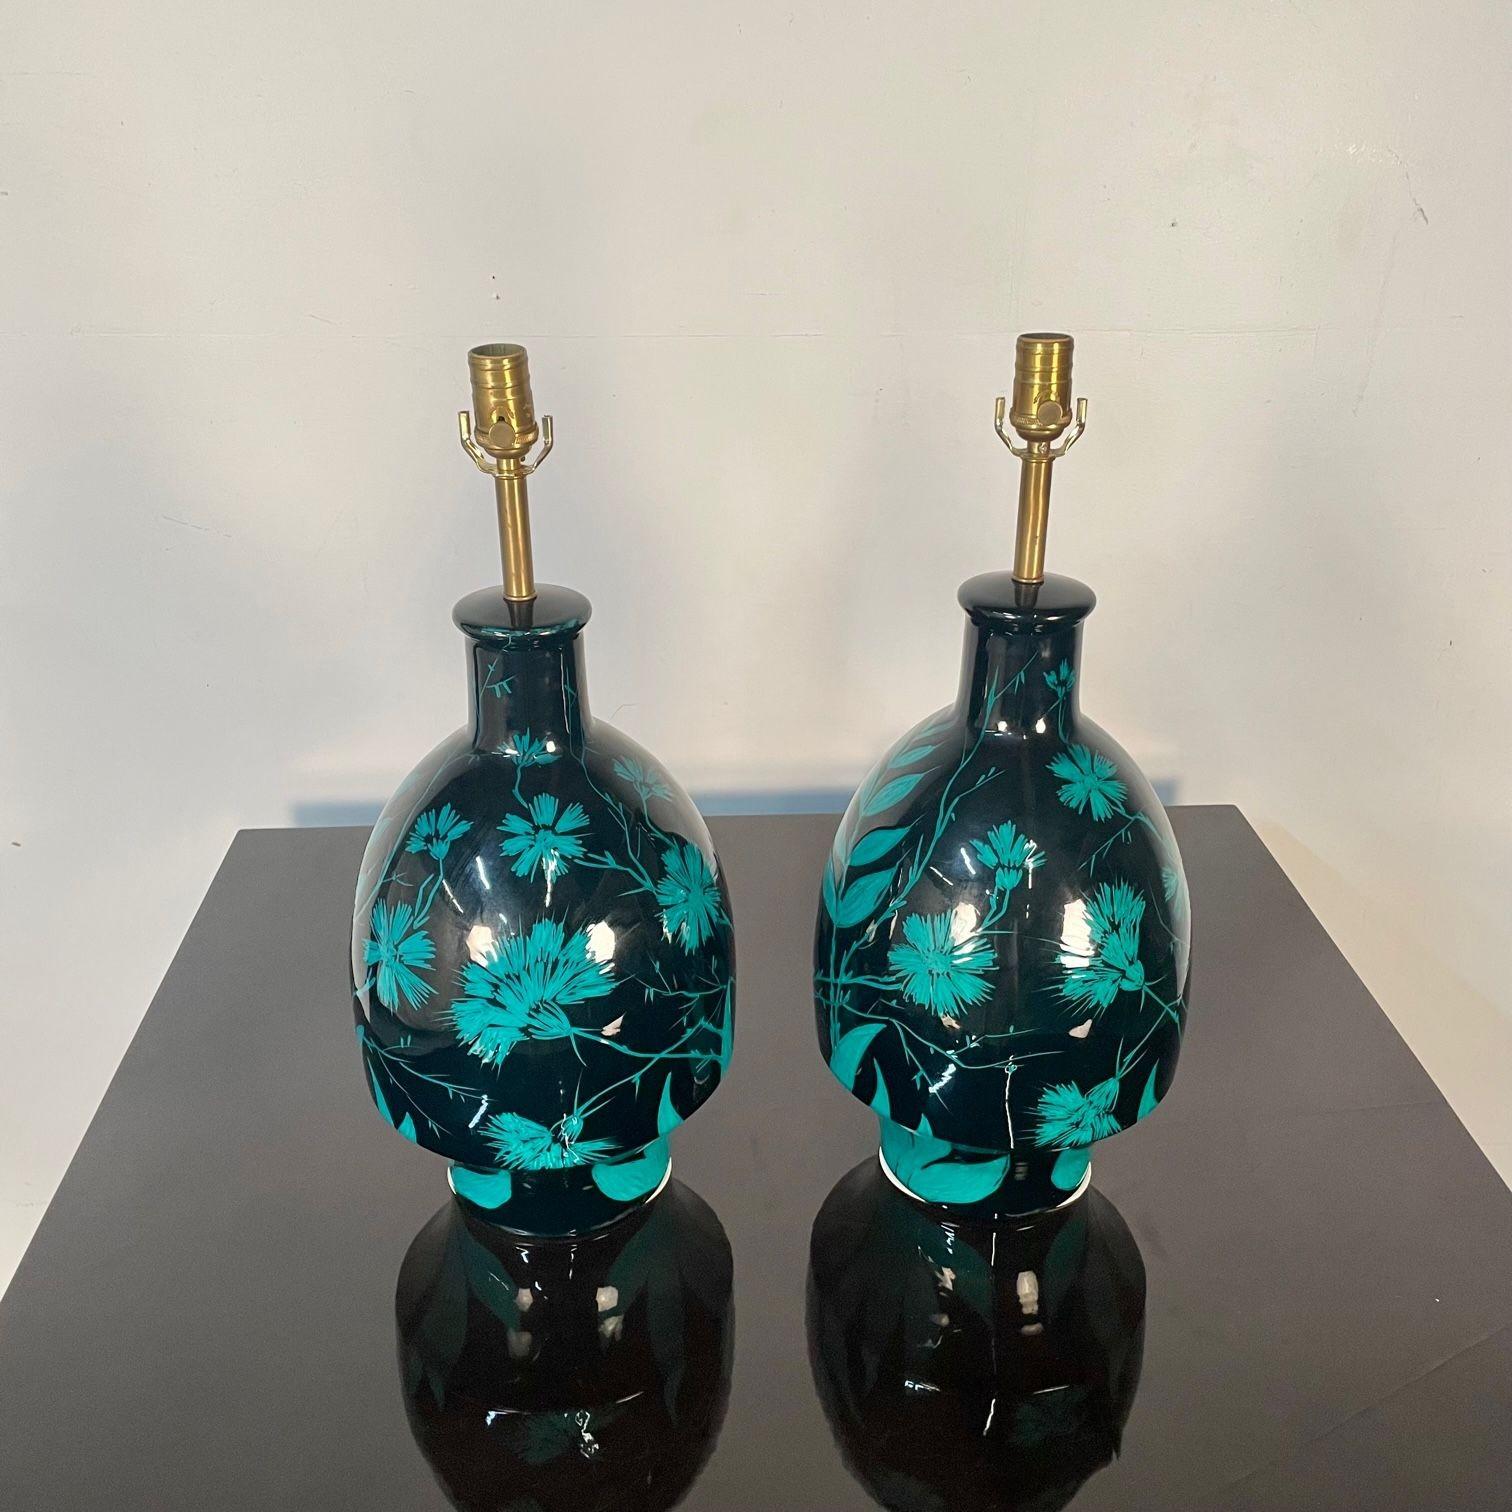 Contemporary Pair of Mid-Century Modern Ceramic Floral Motif Table Lamps, Green and Blue For Sale